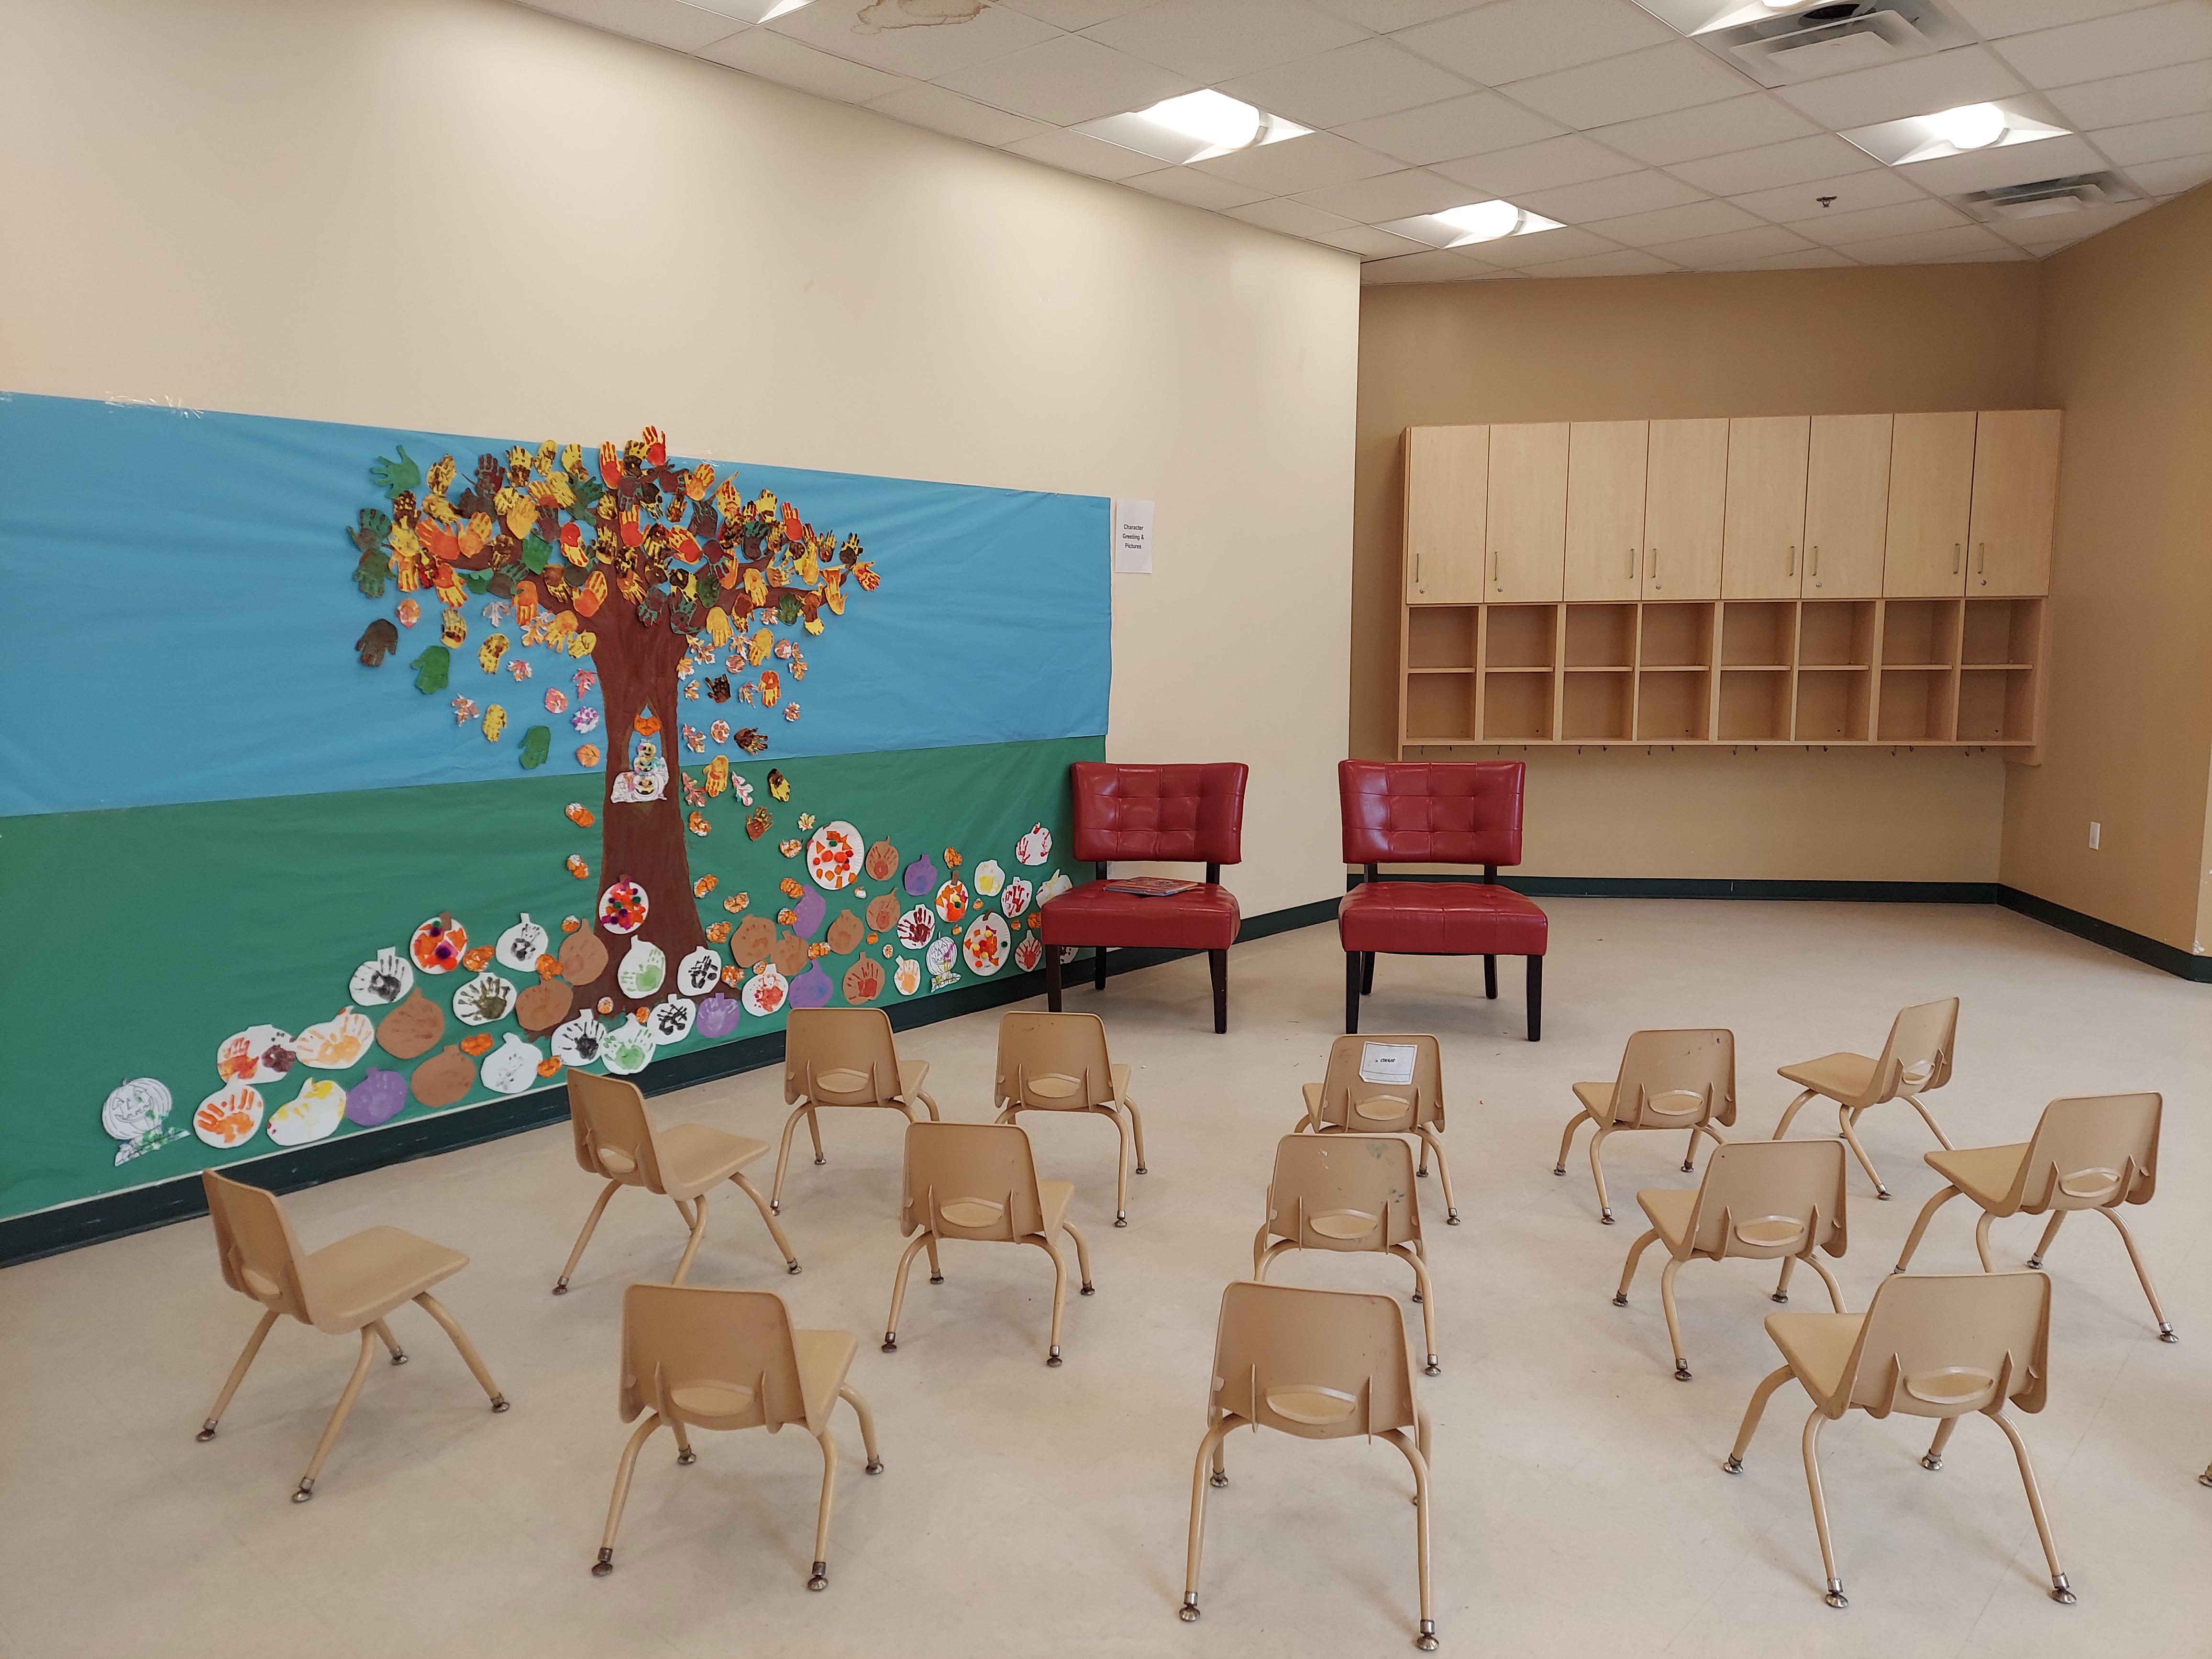 Spacious gym space set up for Storytime LIVE!